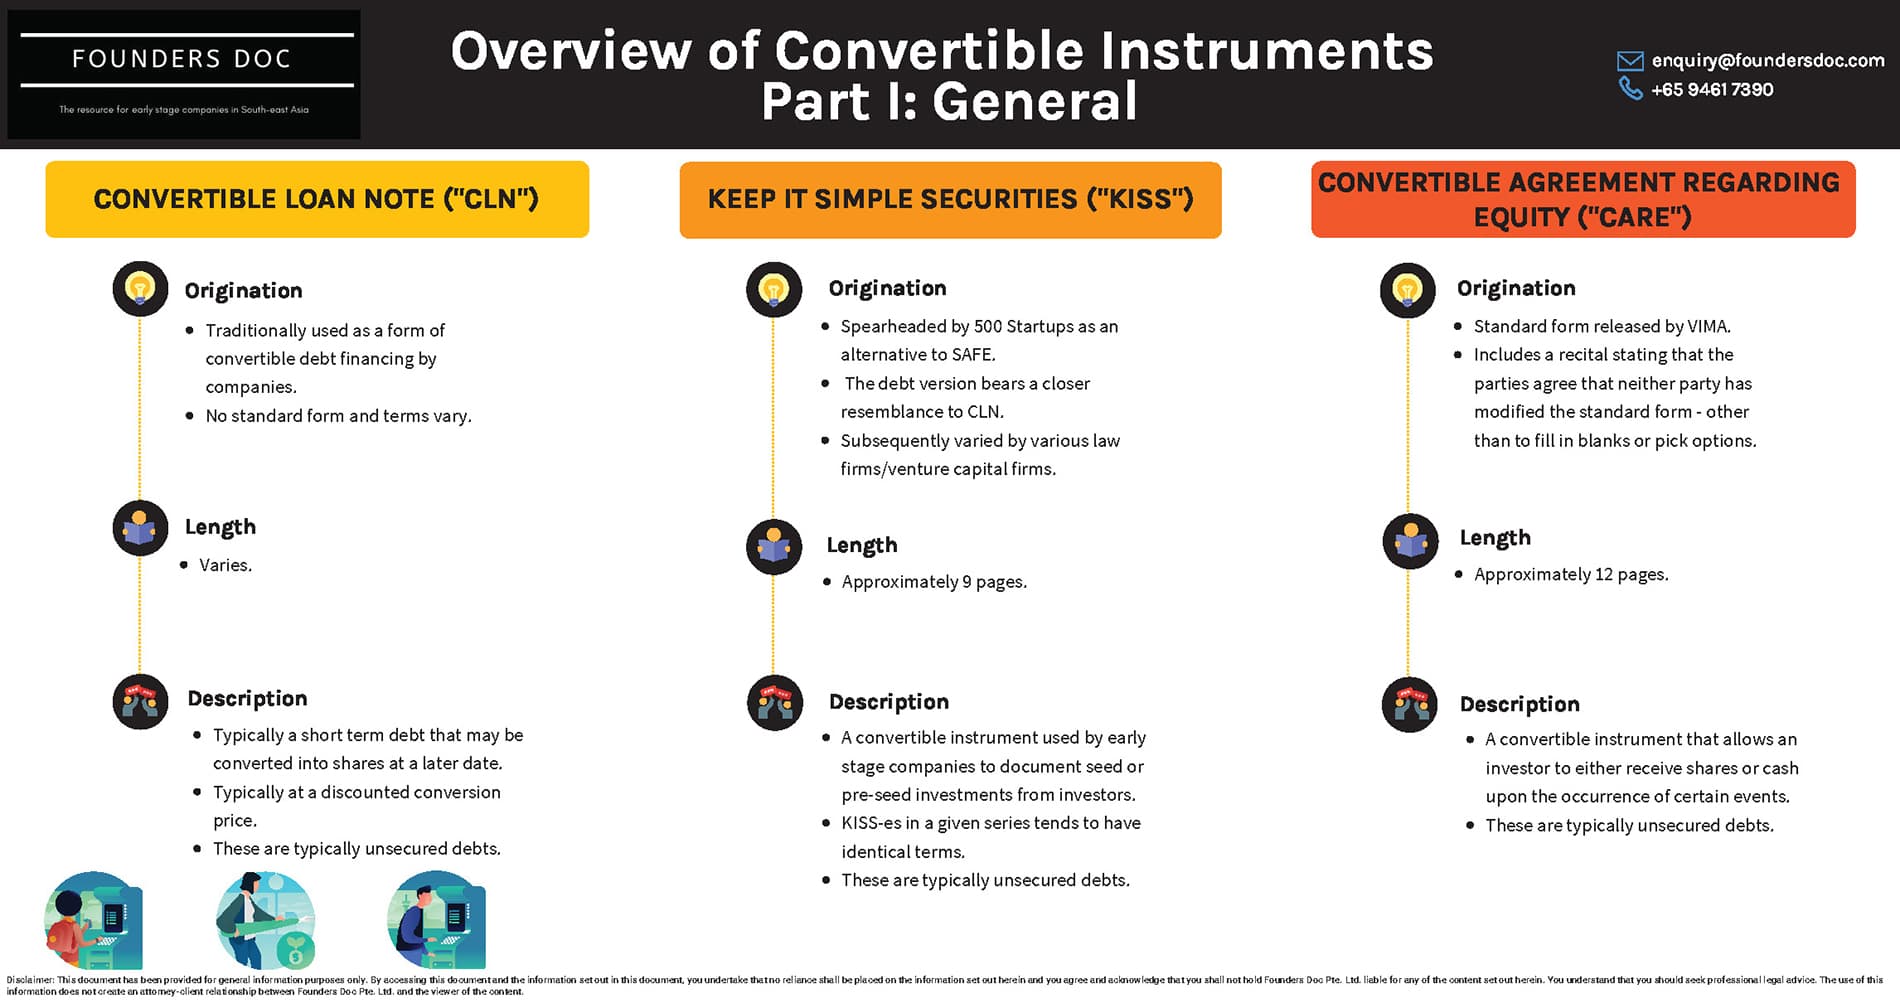 Overview of Convertible Instruments in Singapore